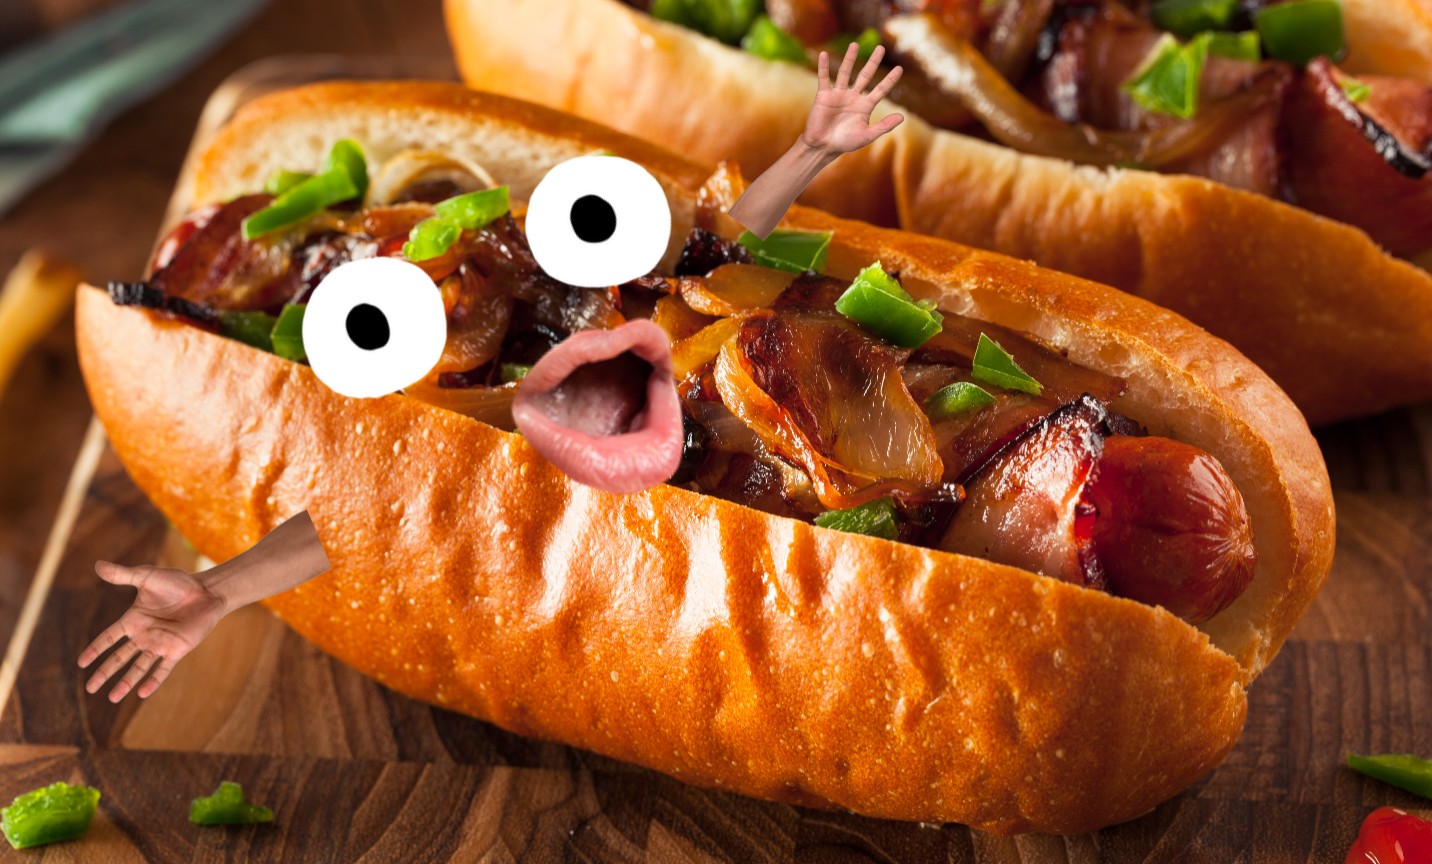 Hot dog with eyes and mouth